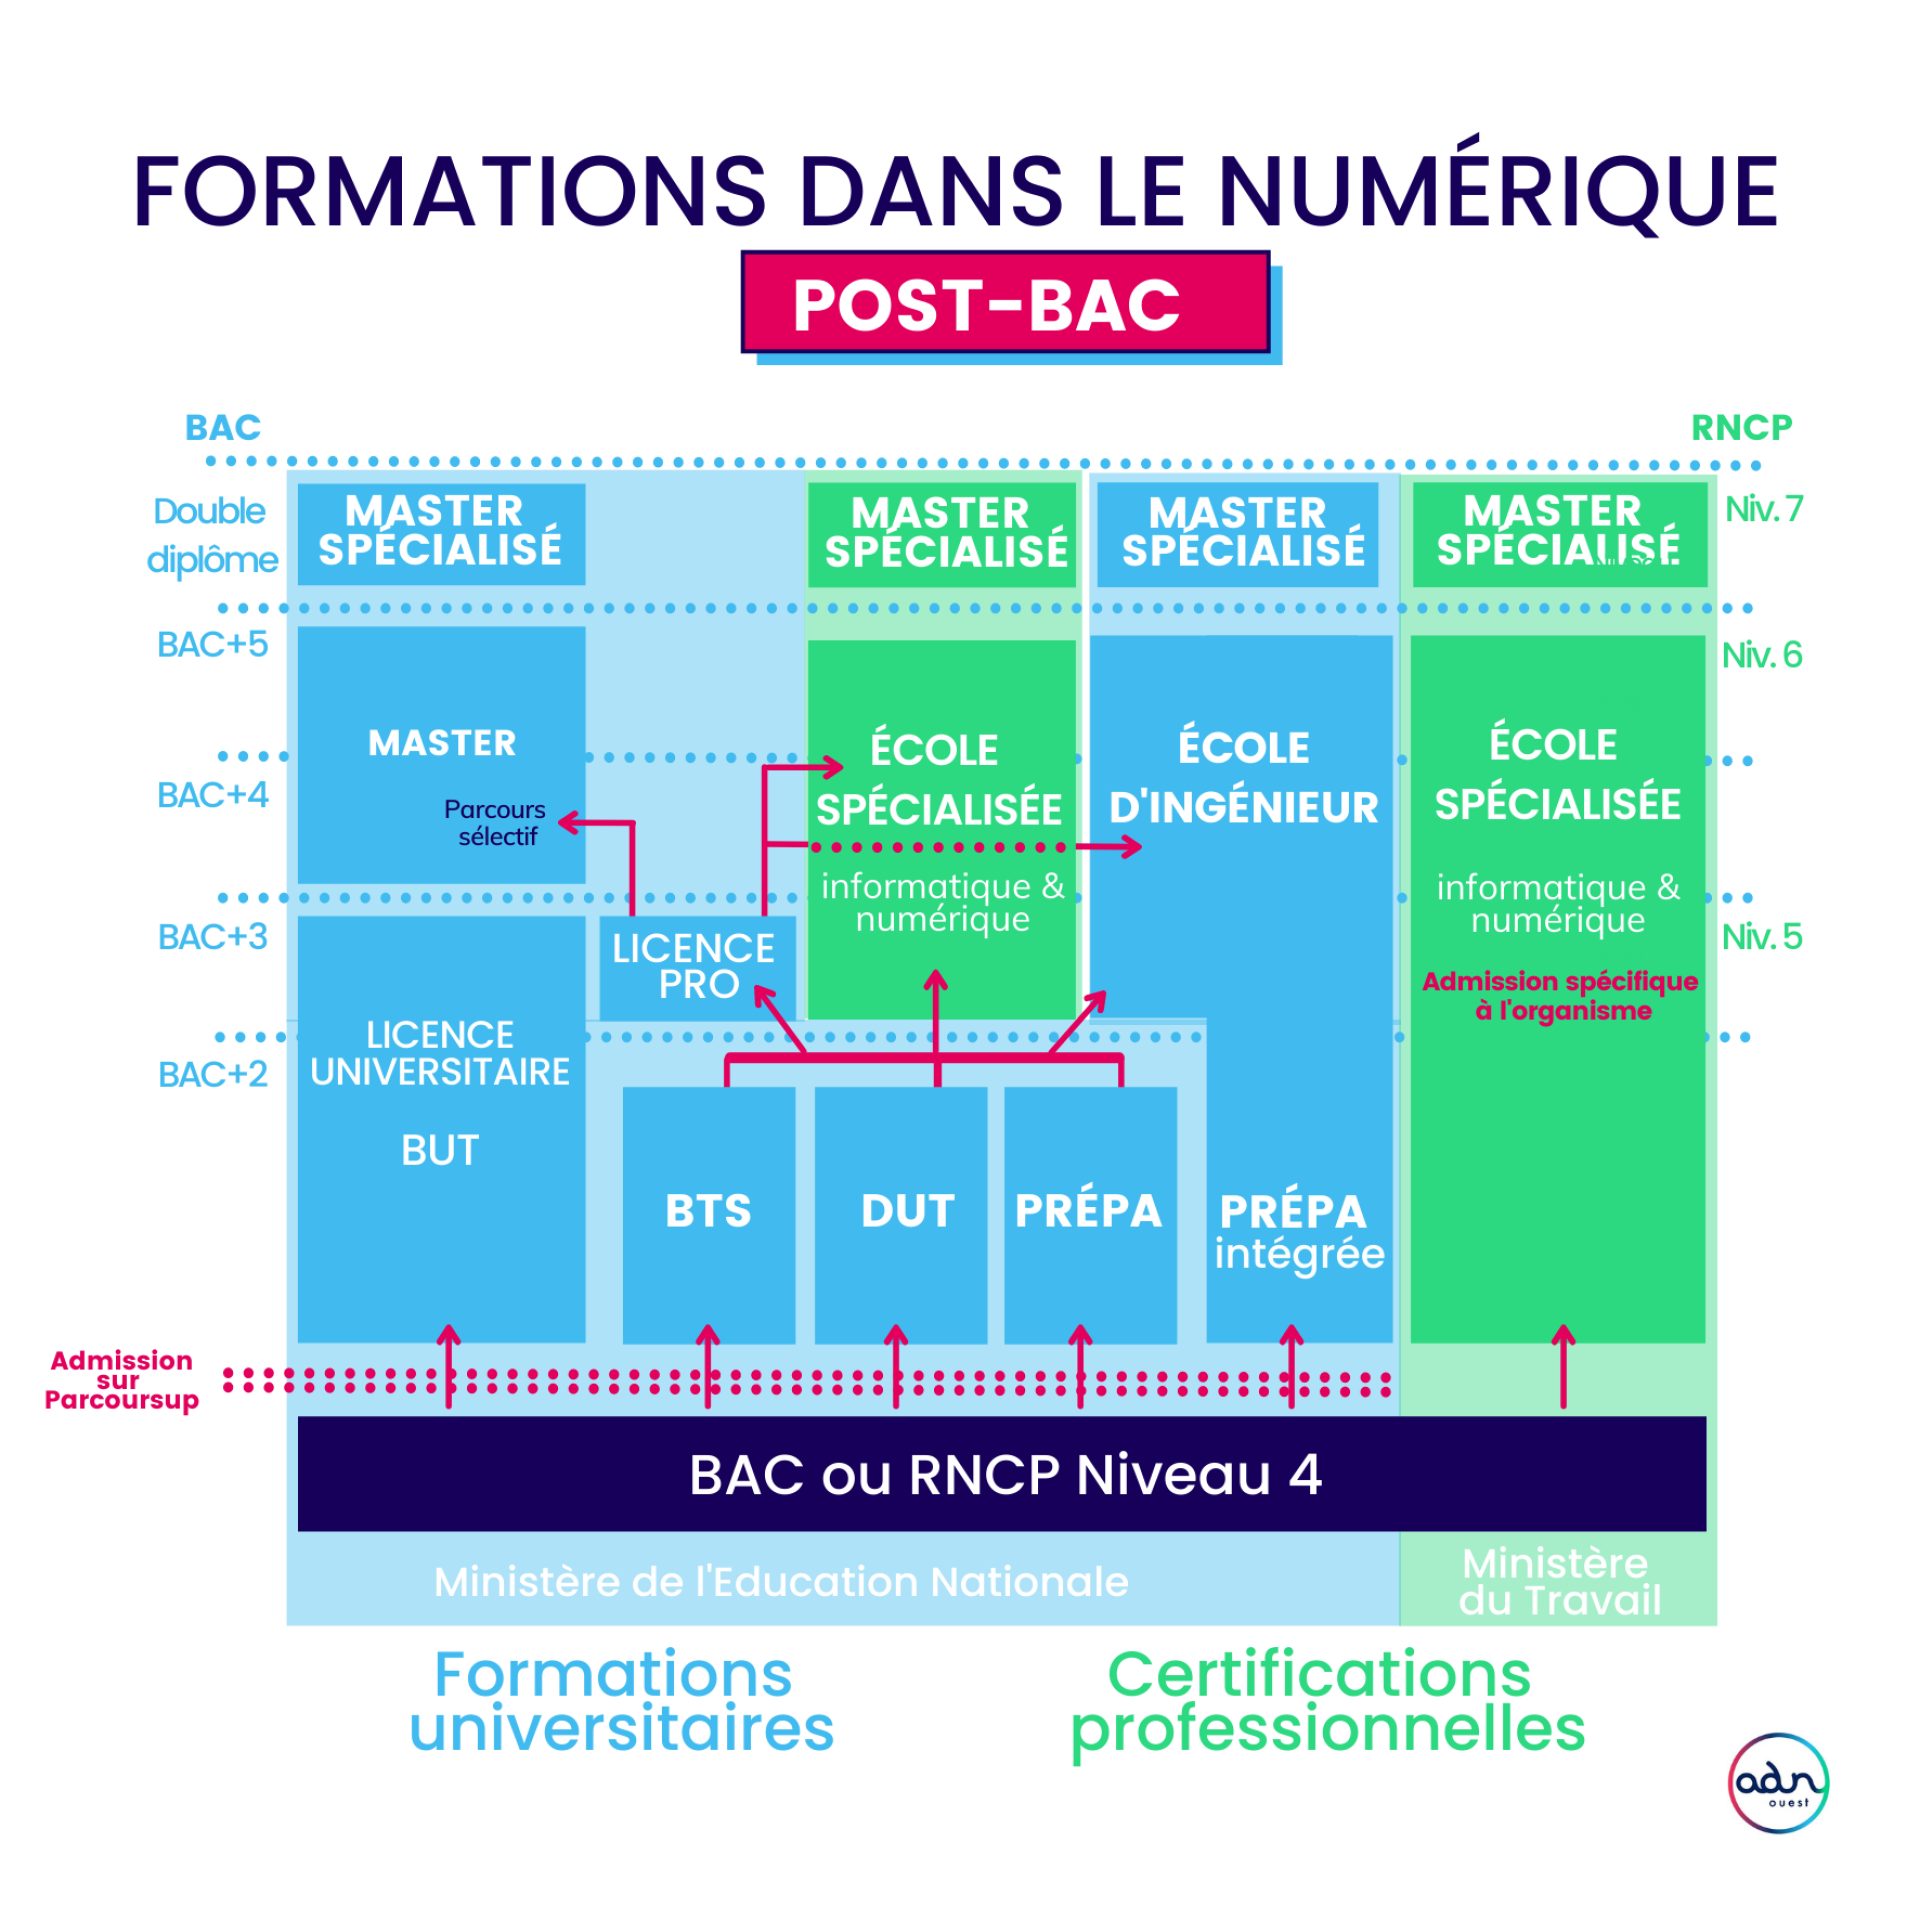 Formation universitaires